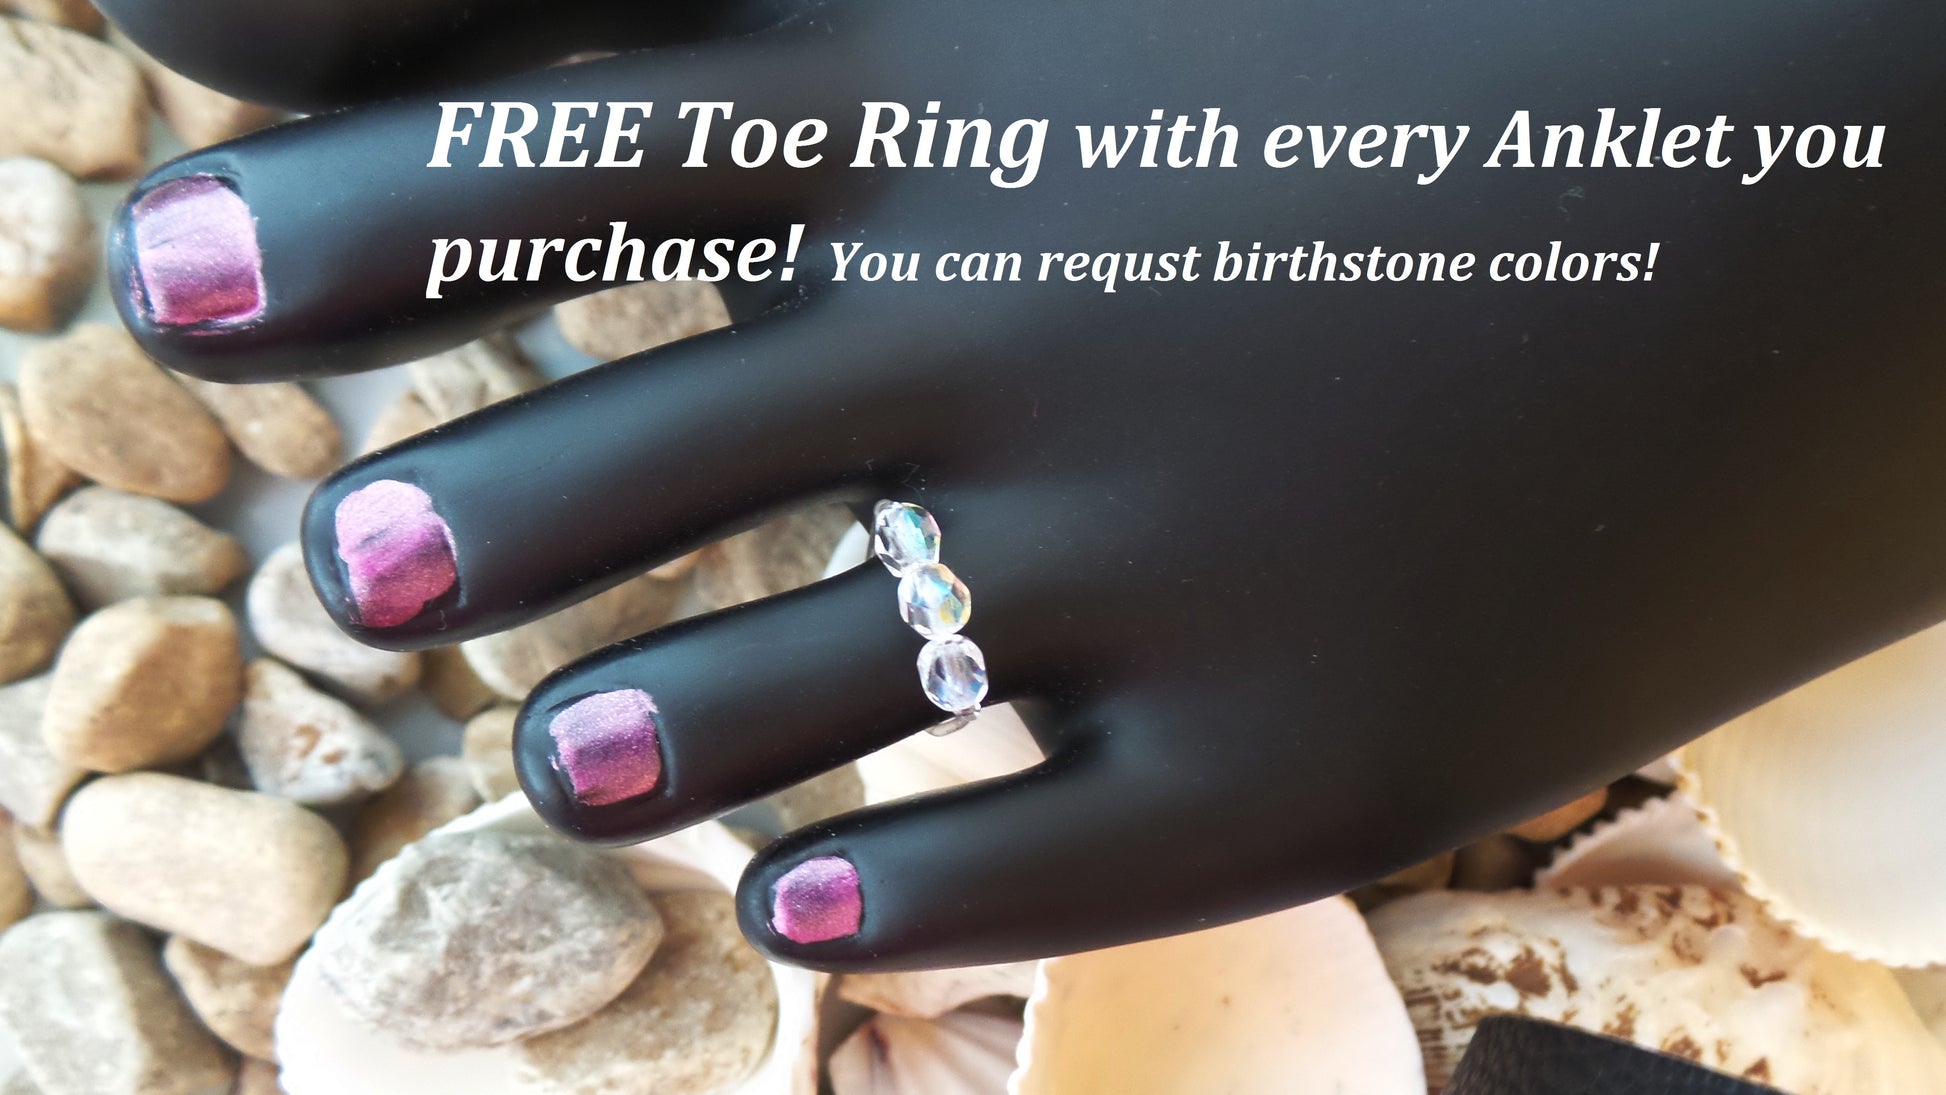 FREE TOE RING with every anklet you purchase